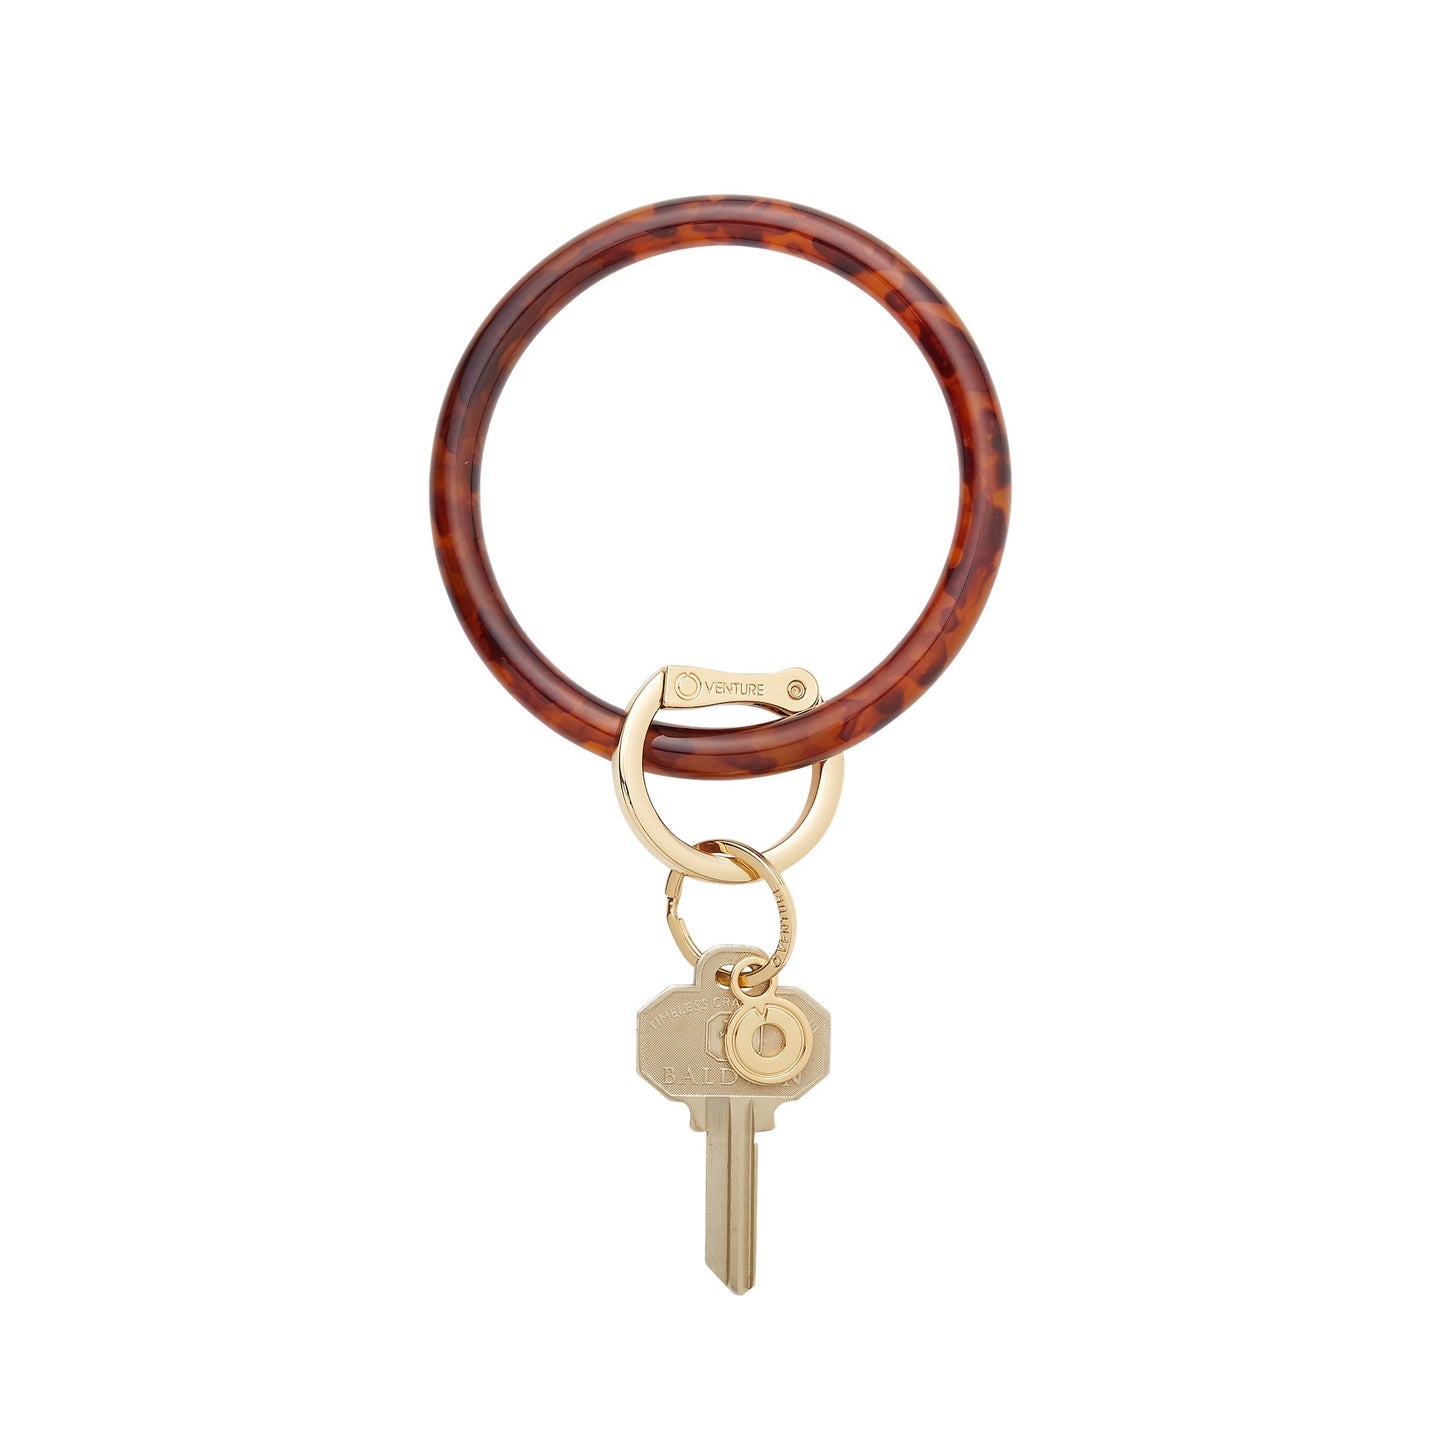 Resin Big O Key Ring in brown and black tortoise print with gold locking clasp